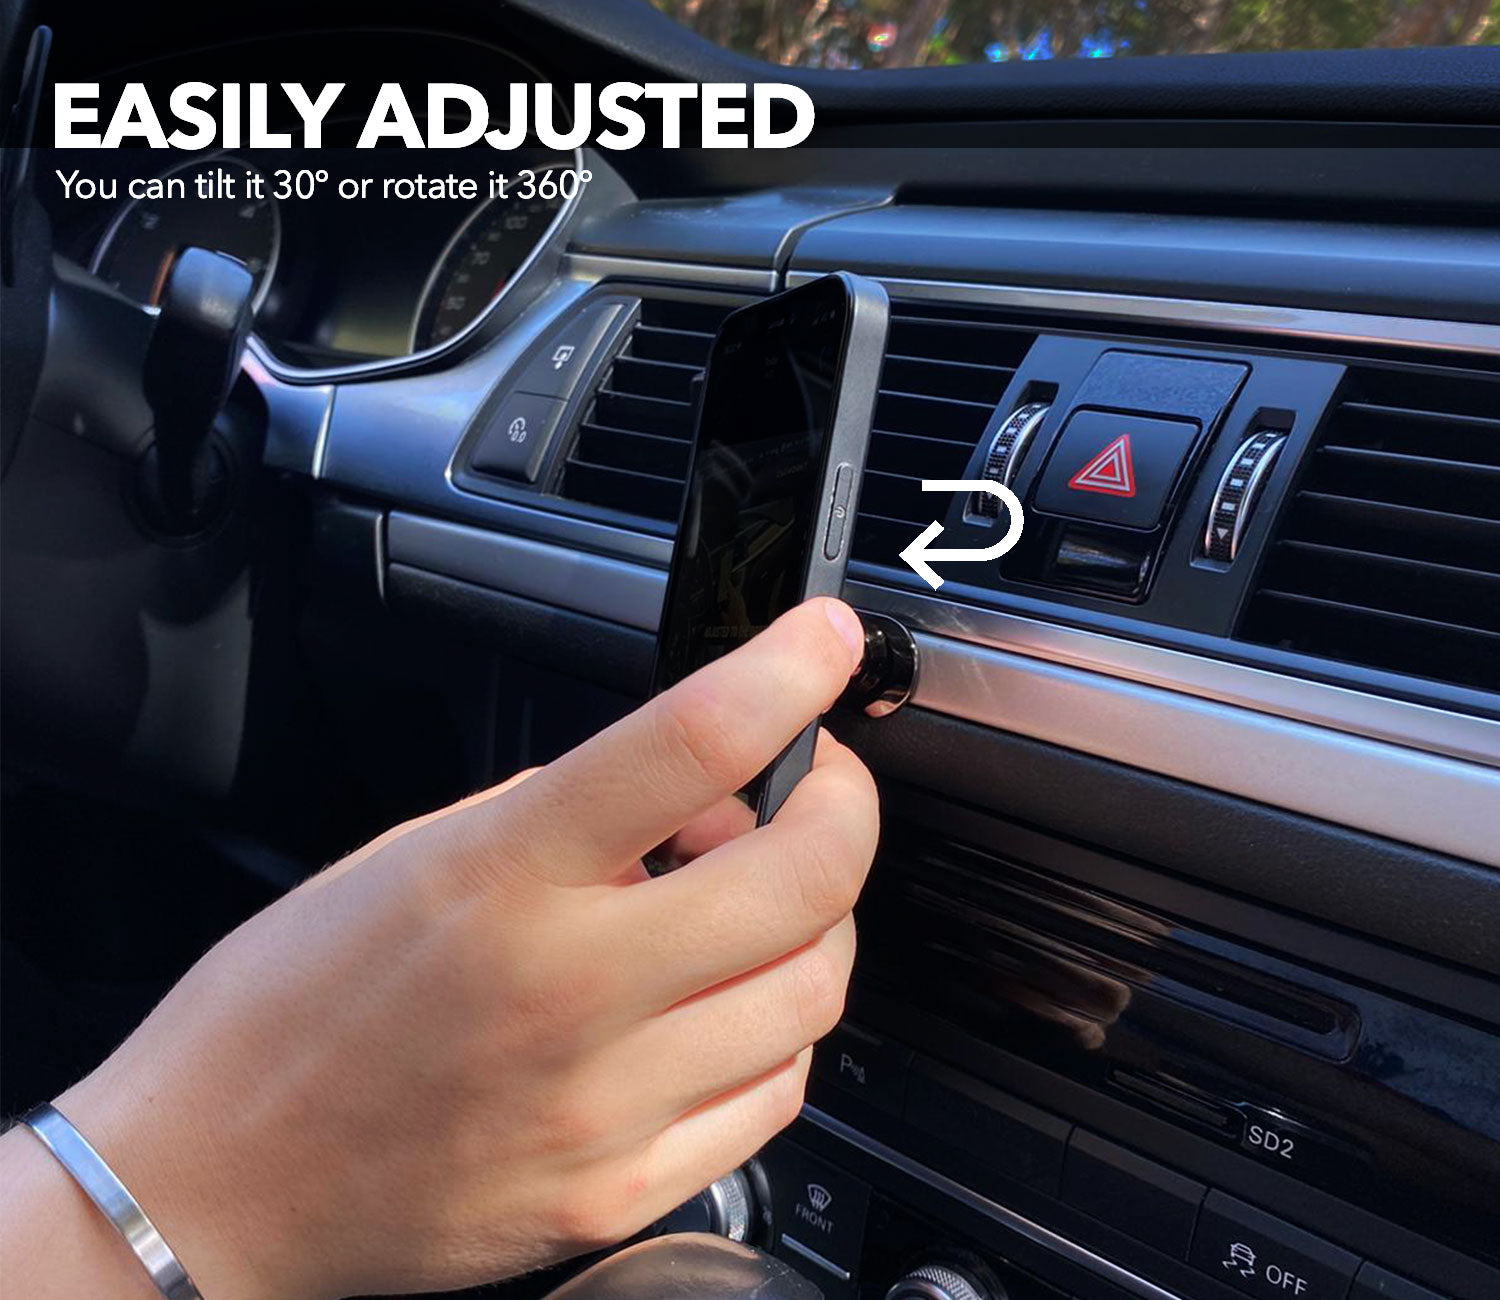 Magnetic Car Mount (Works with every phone and car model)